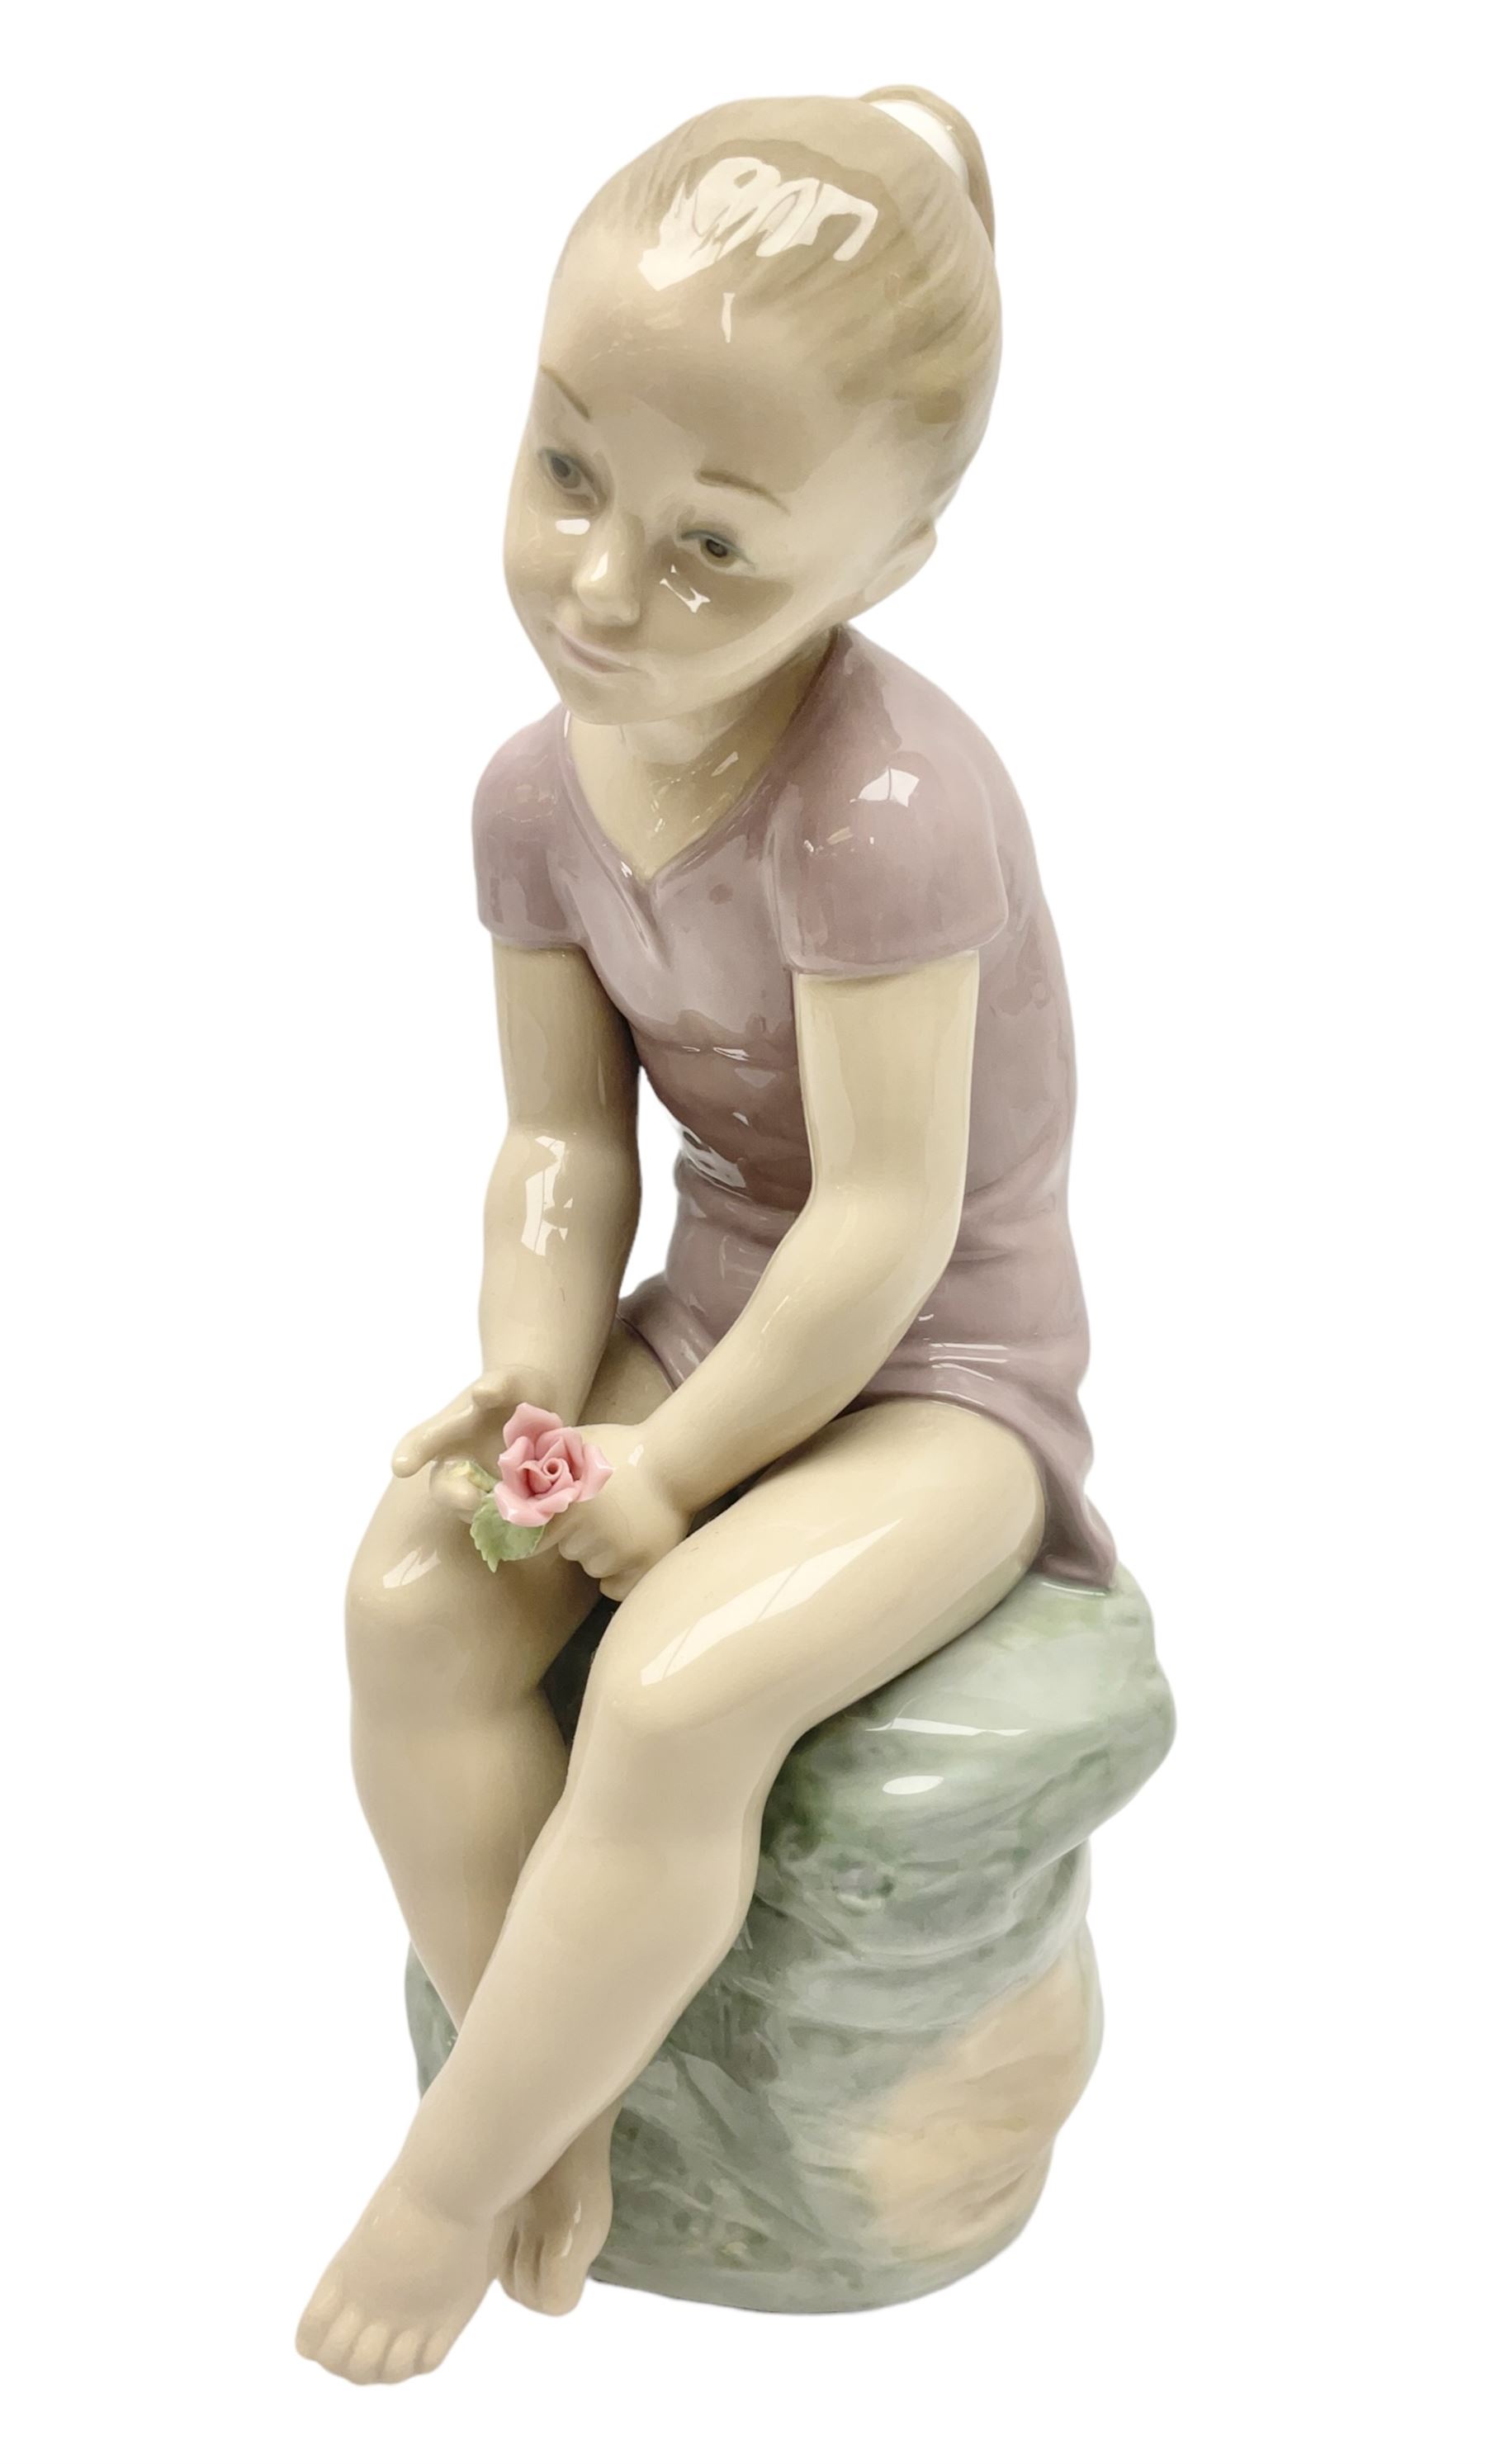 Large Nao figure modelled as a young girl seated upon a rock holding a rose